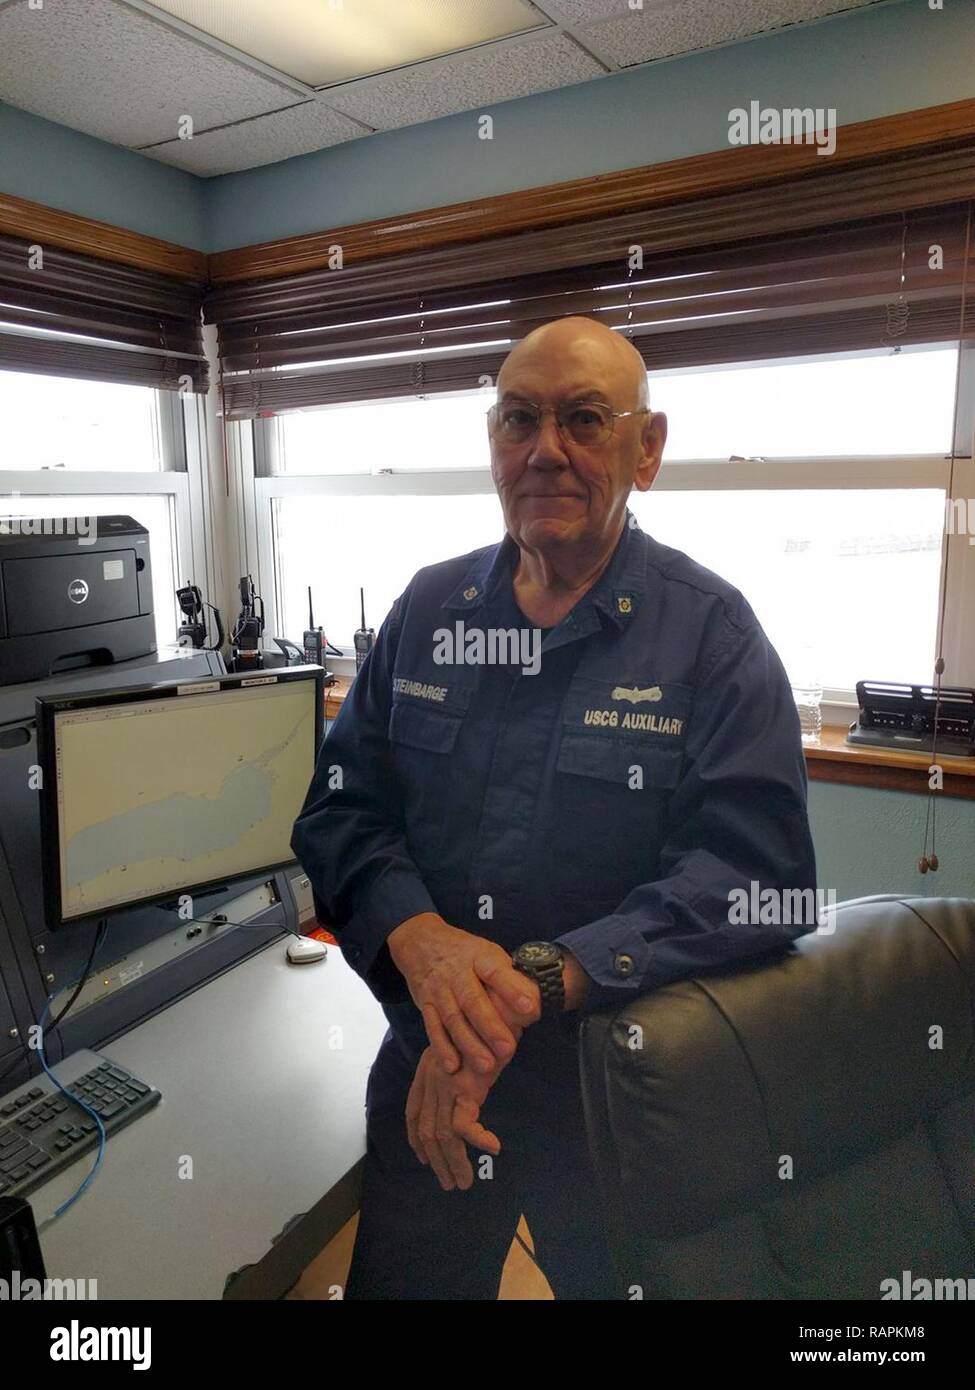 Coast Guard Auxiliary member John Steinbarge mans the communication room at Coast Guard Station Oswego, New York, Feb. 15, 2017. Coast Guard Auxiliary members are unpaid volunteers who assist at Coast Guard units throughout the country filling various roles. Stock Photo